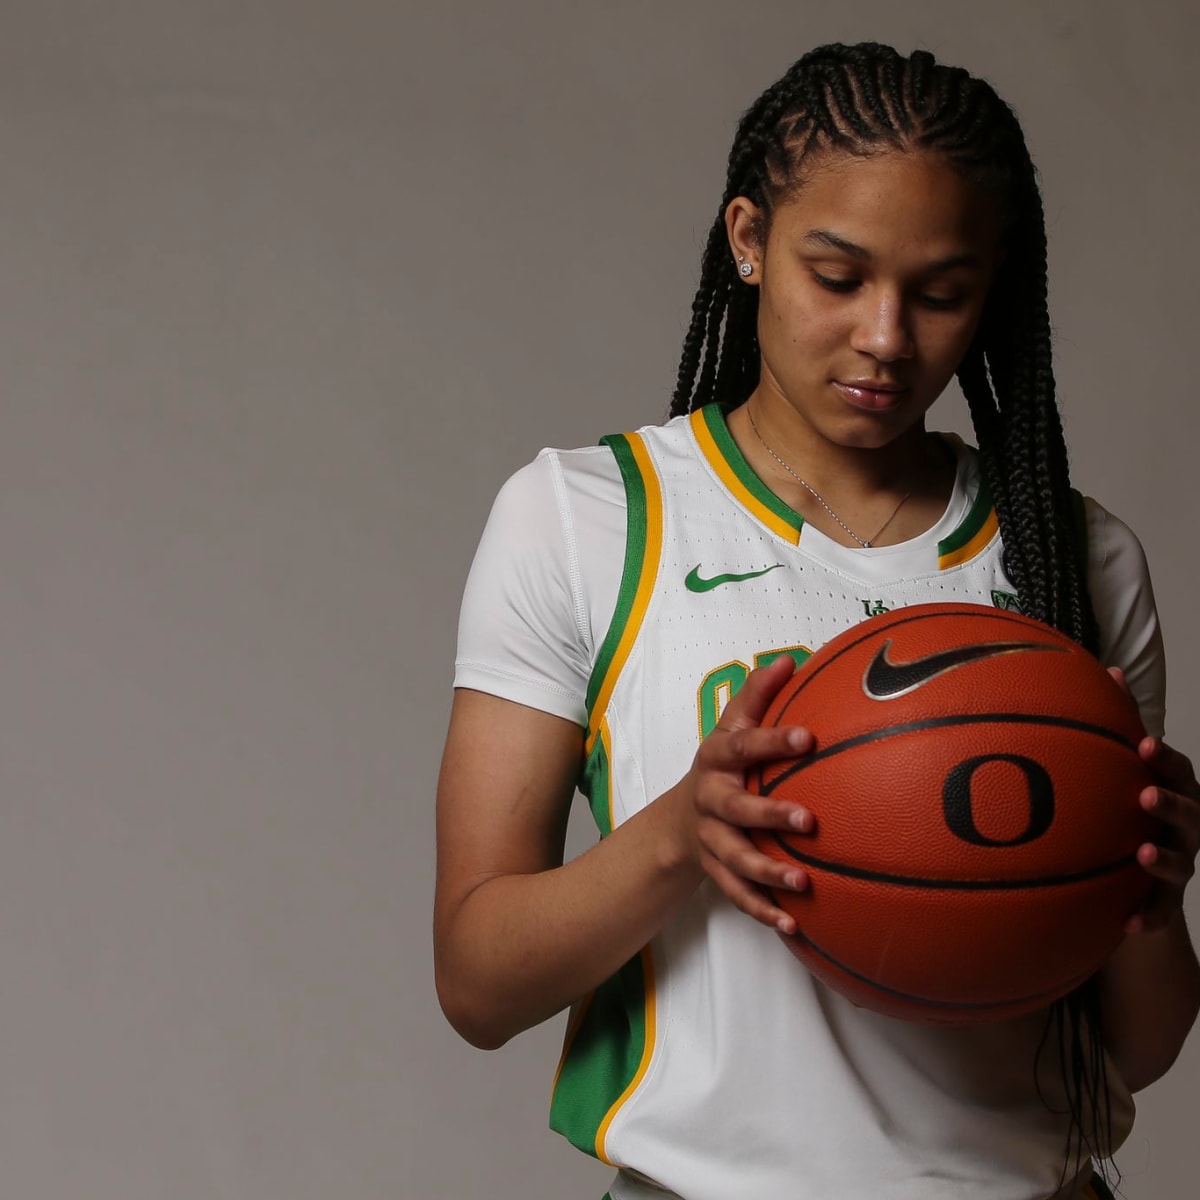 USC Transfer Endyia Rogers Discusses Visit With Oregon Ducks